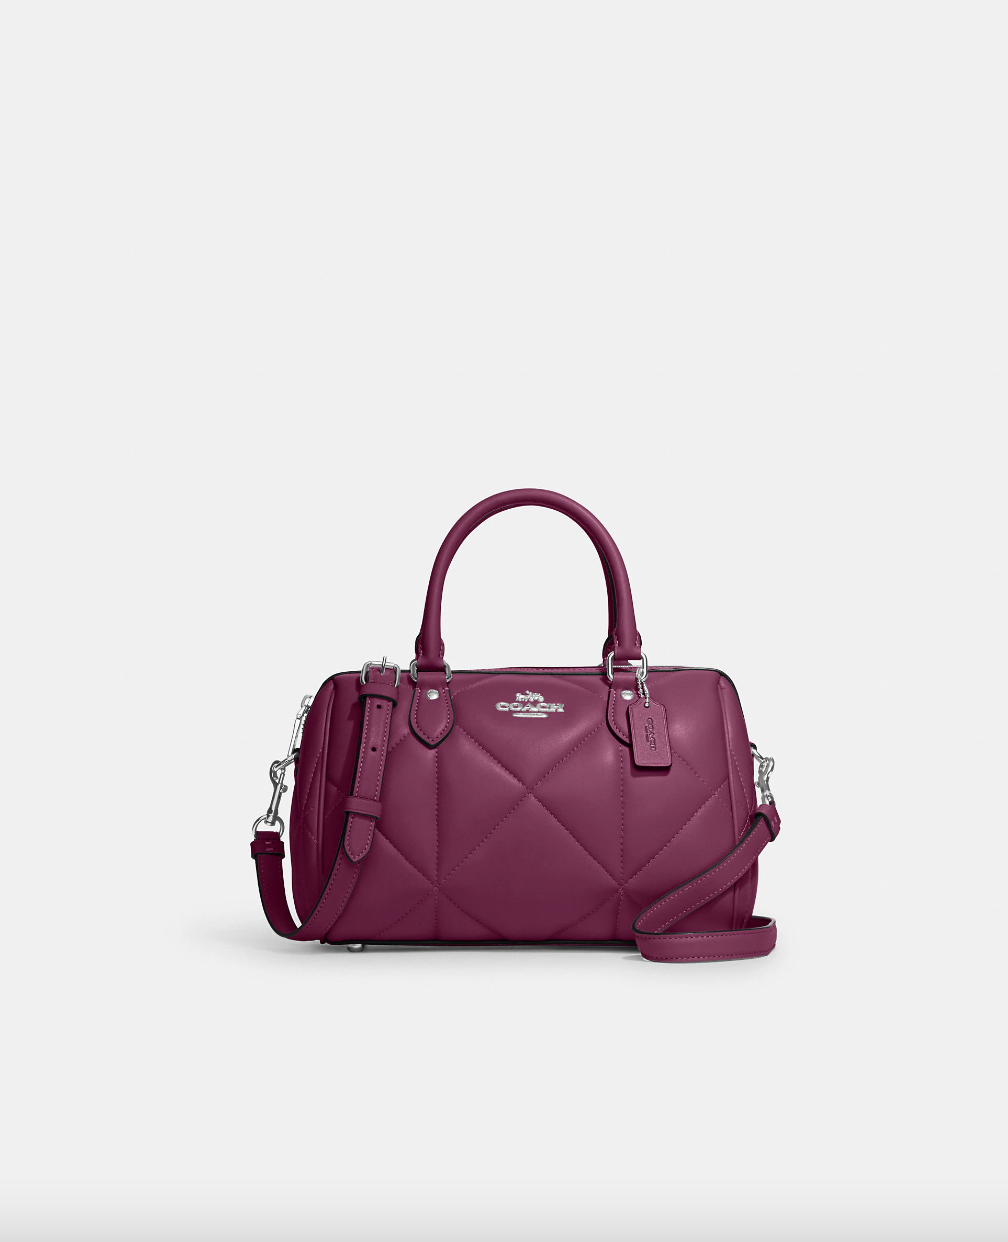 Coach Rowan Satchel With Puffy Diamond Quilting In Deep Berry (Pre-Order)